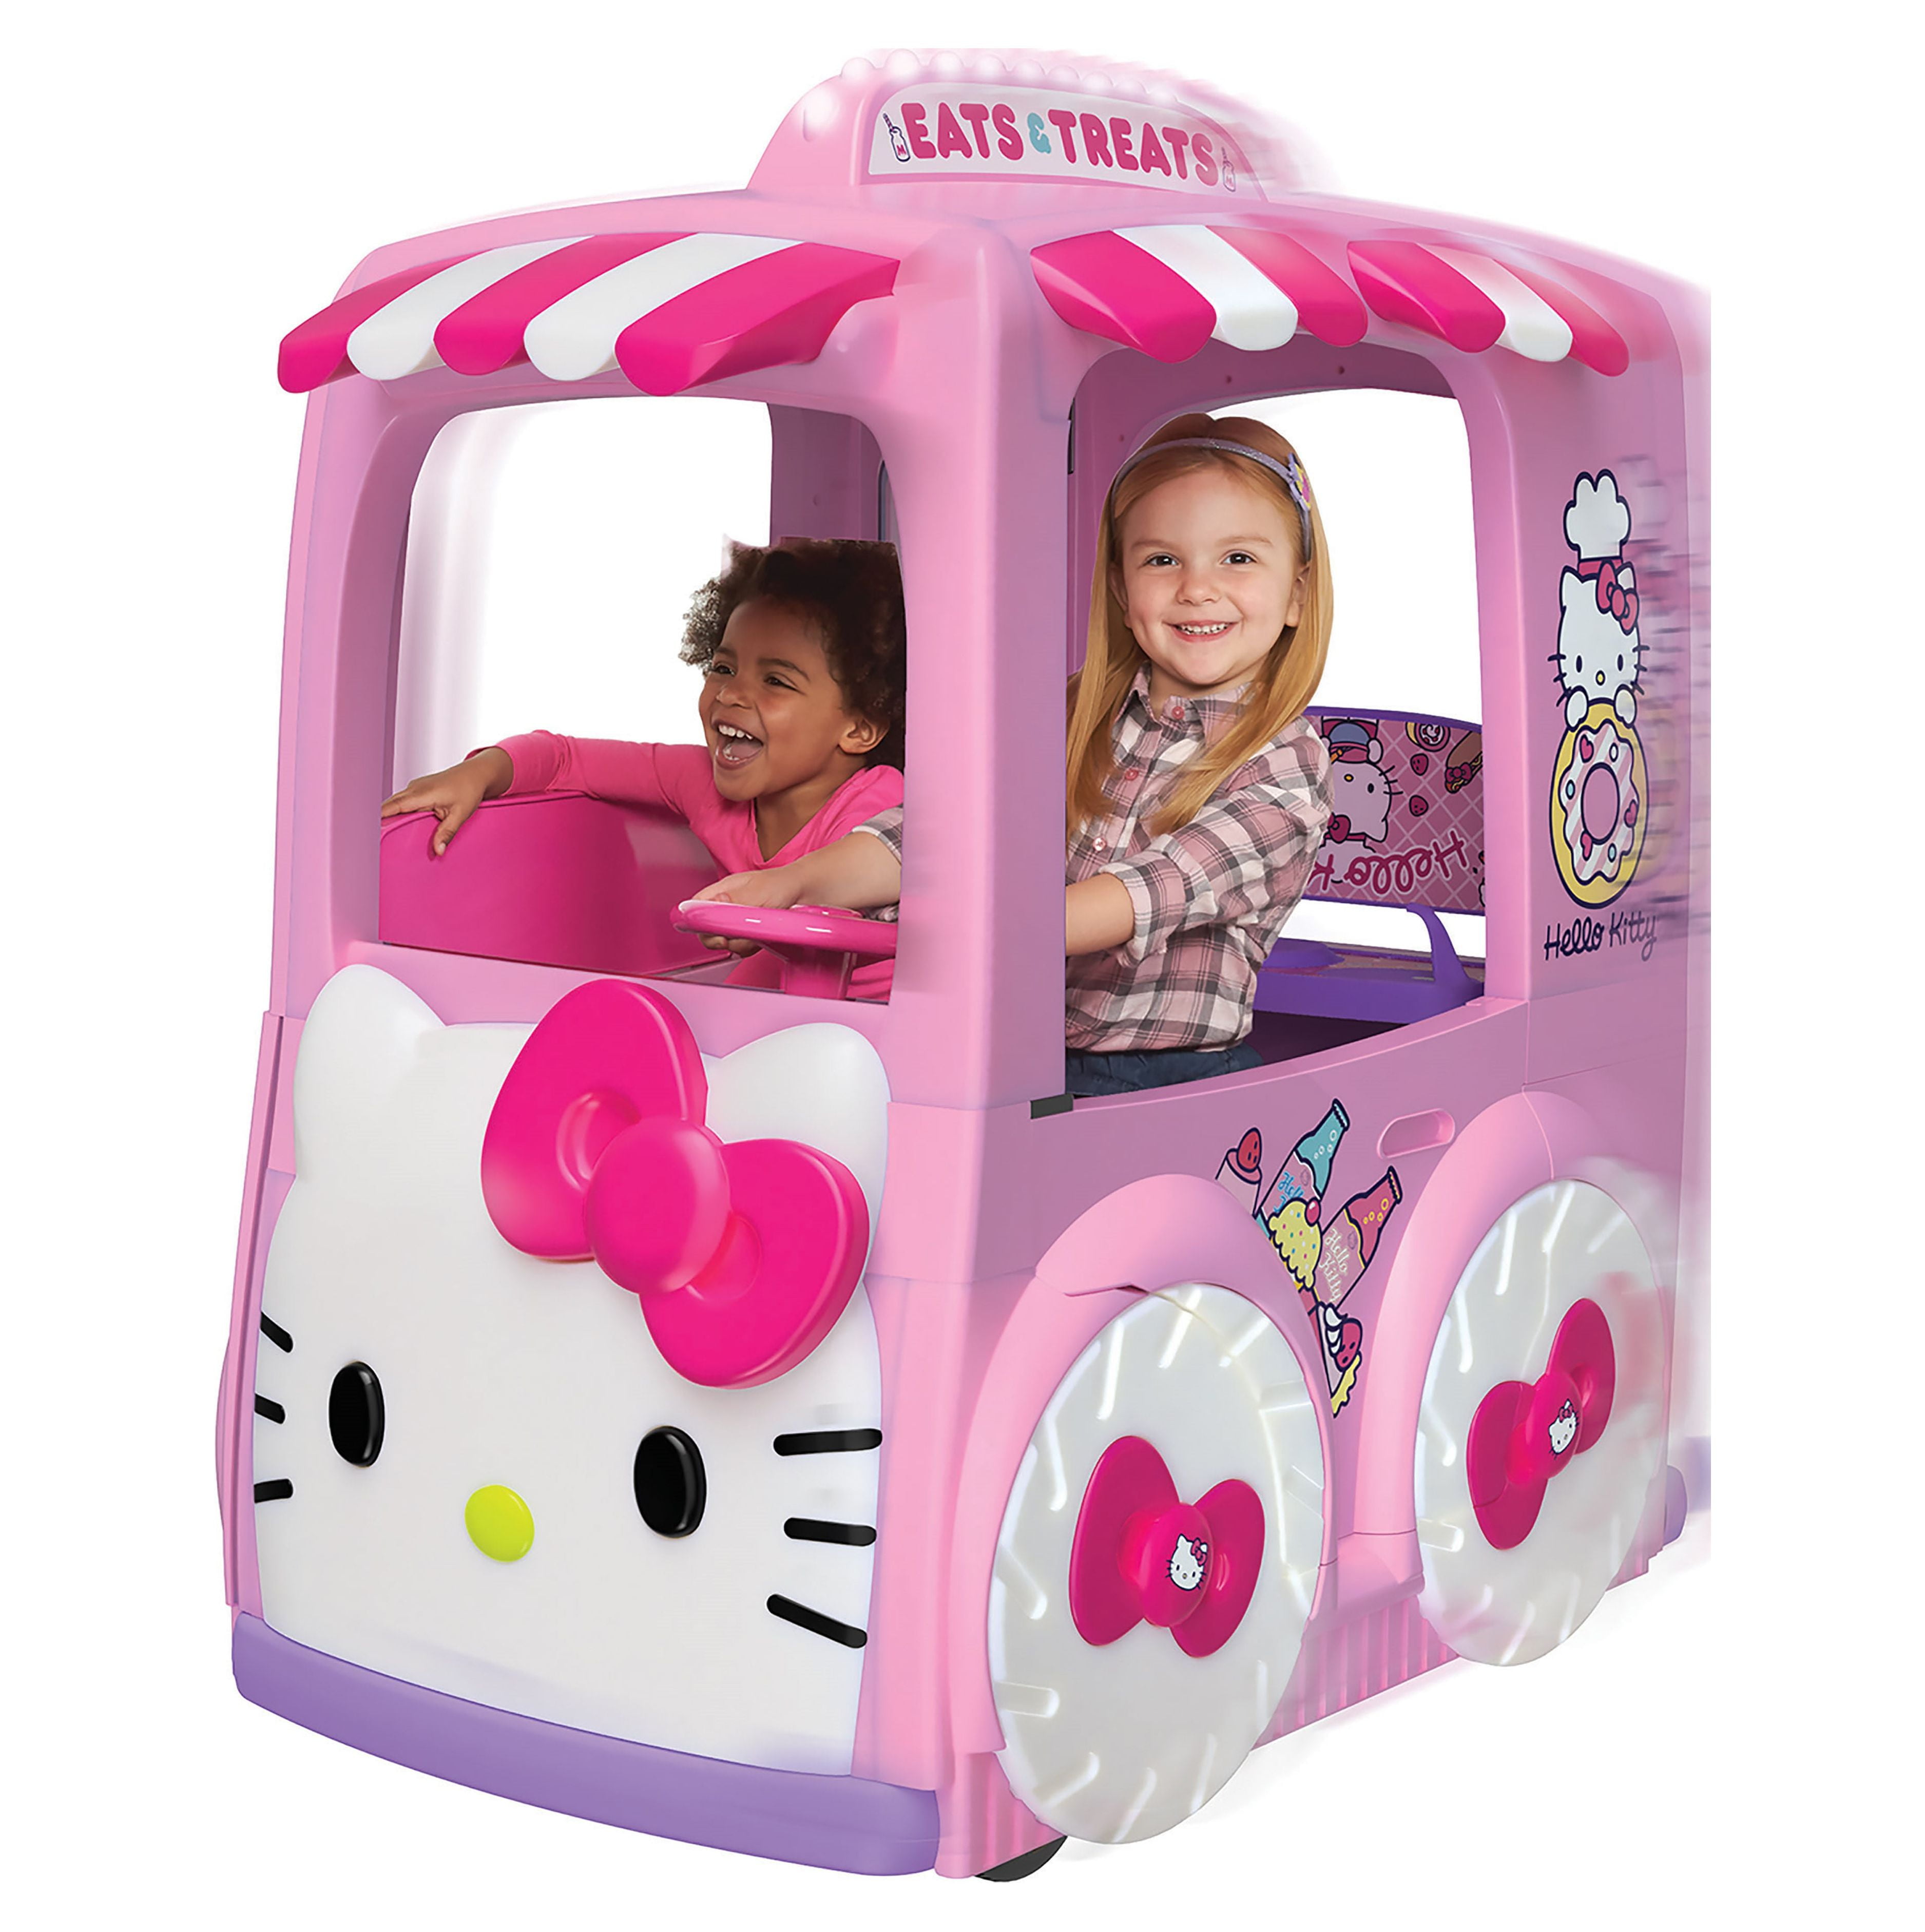 Hello Kitty12 Volt “Eats and Treats” Sweet Food Truck Play-Center Ride-On  for Boys & Girls Ages 3 and up